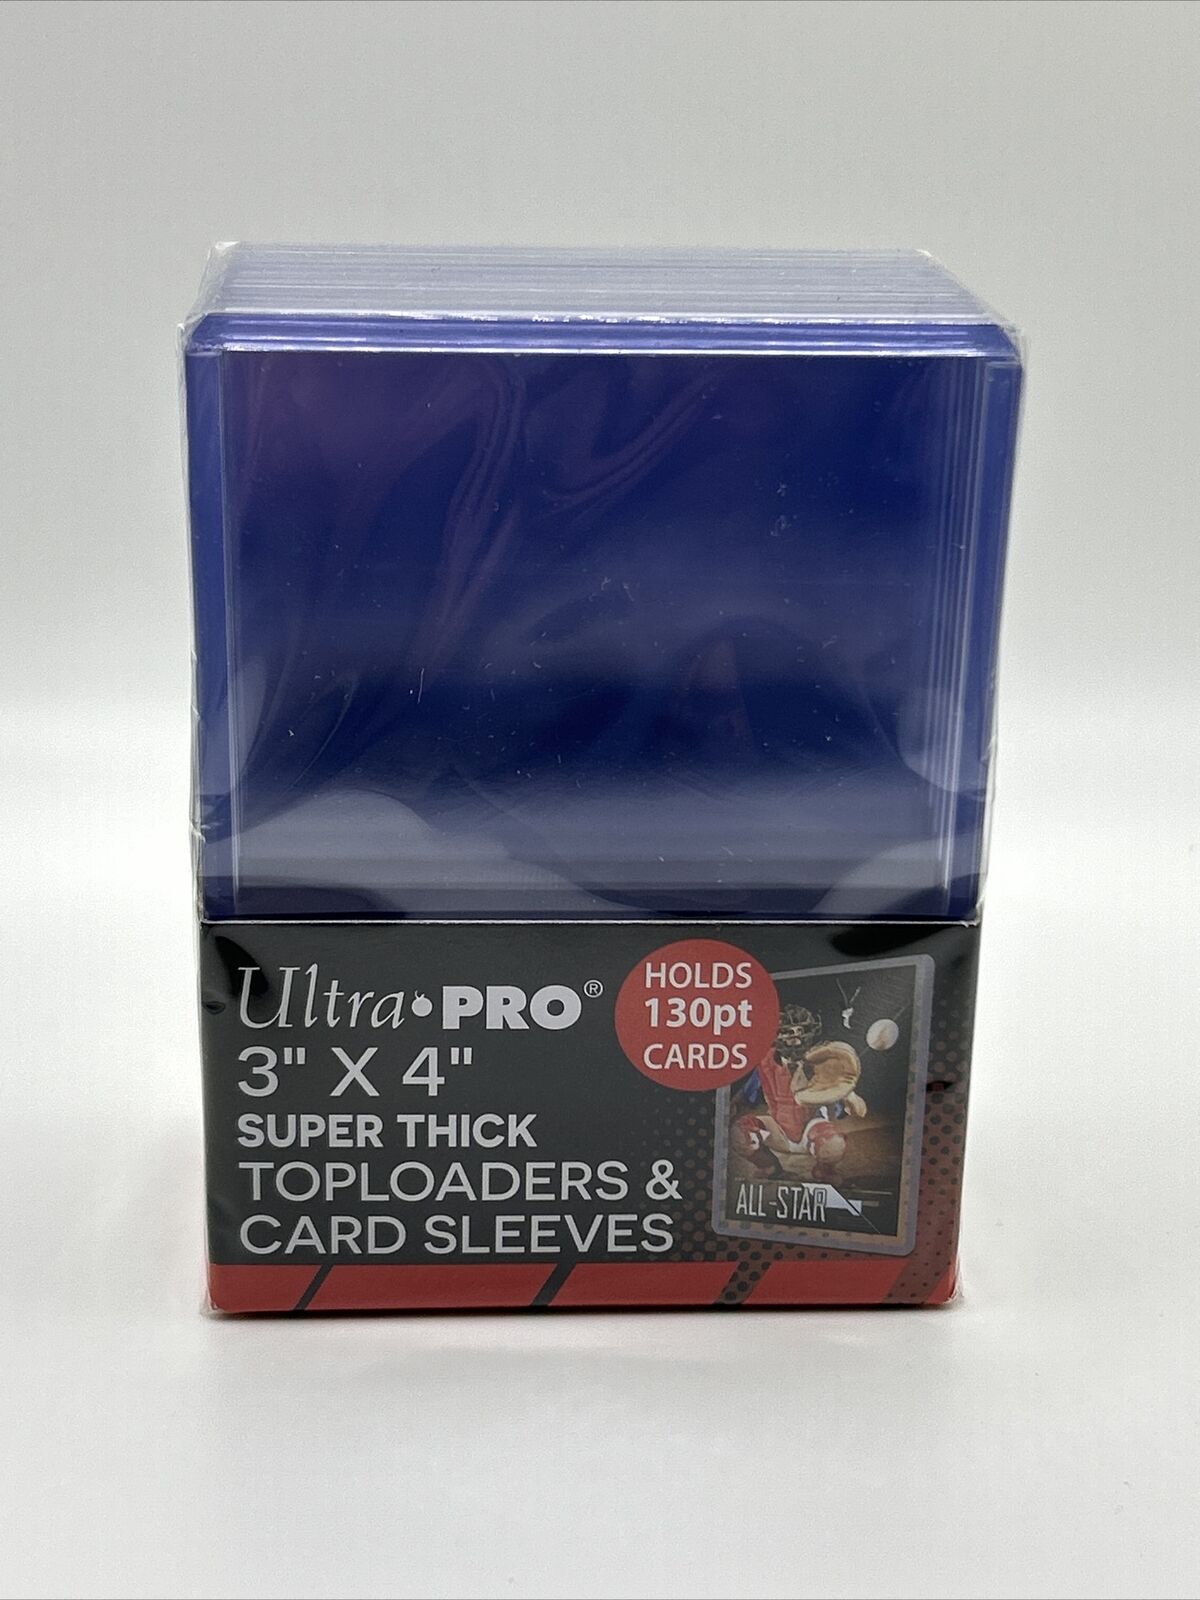 Ultra Pro 3X4 Super Thick Toploaders 130pt Point 1 Pack of 10 WITH SLEEVES